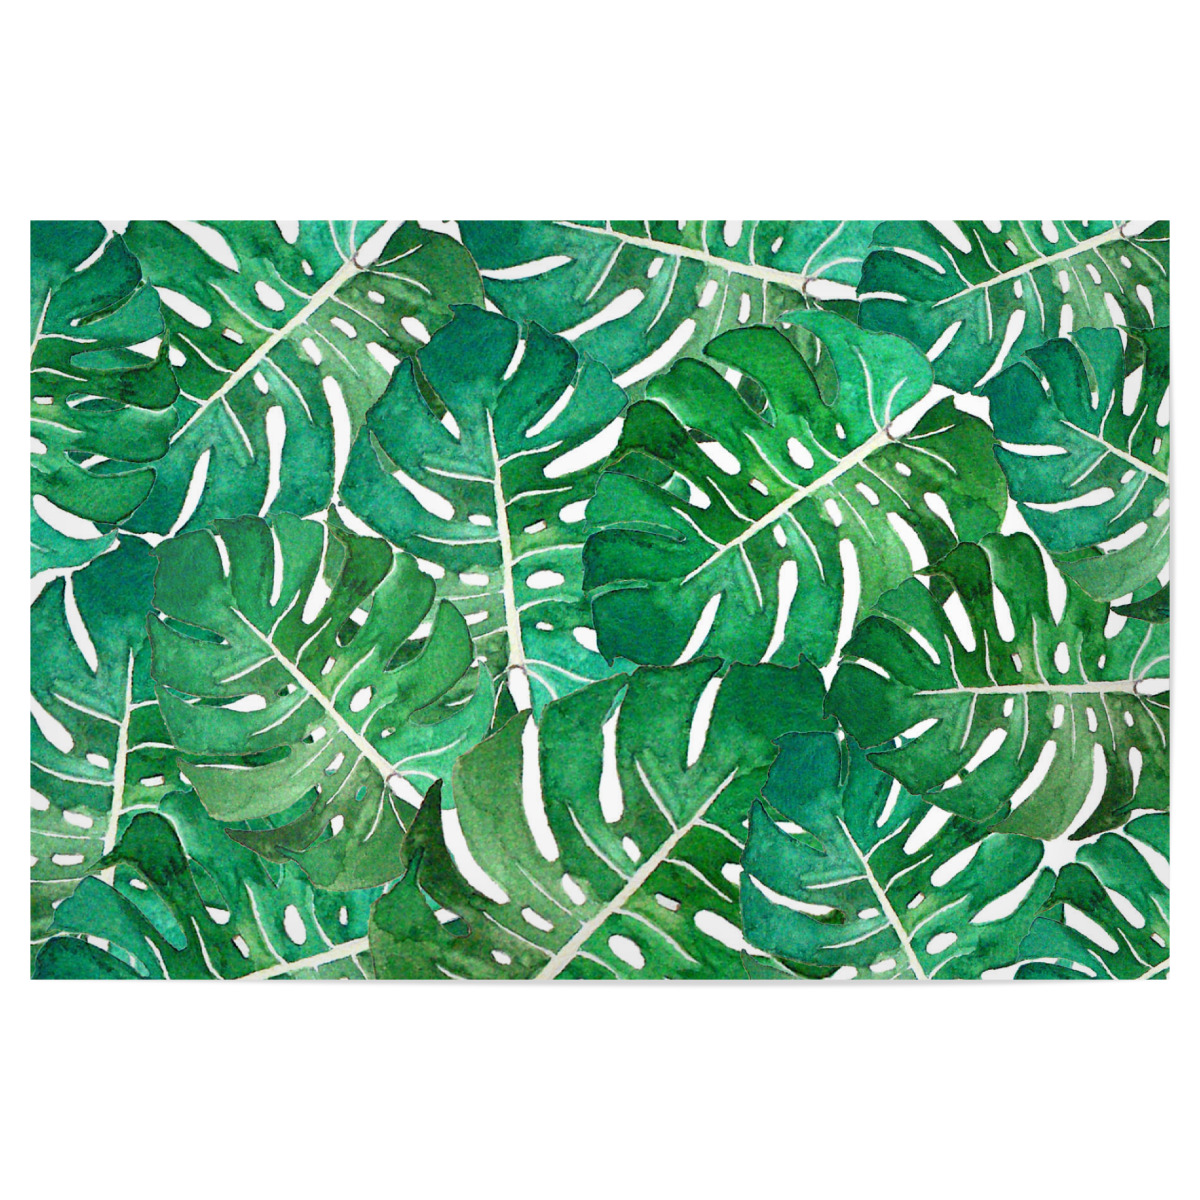 Monstera leaves watercolor n.1 als Poster bei artboxONE kaufen